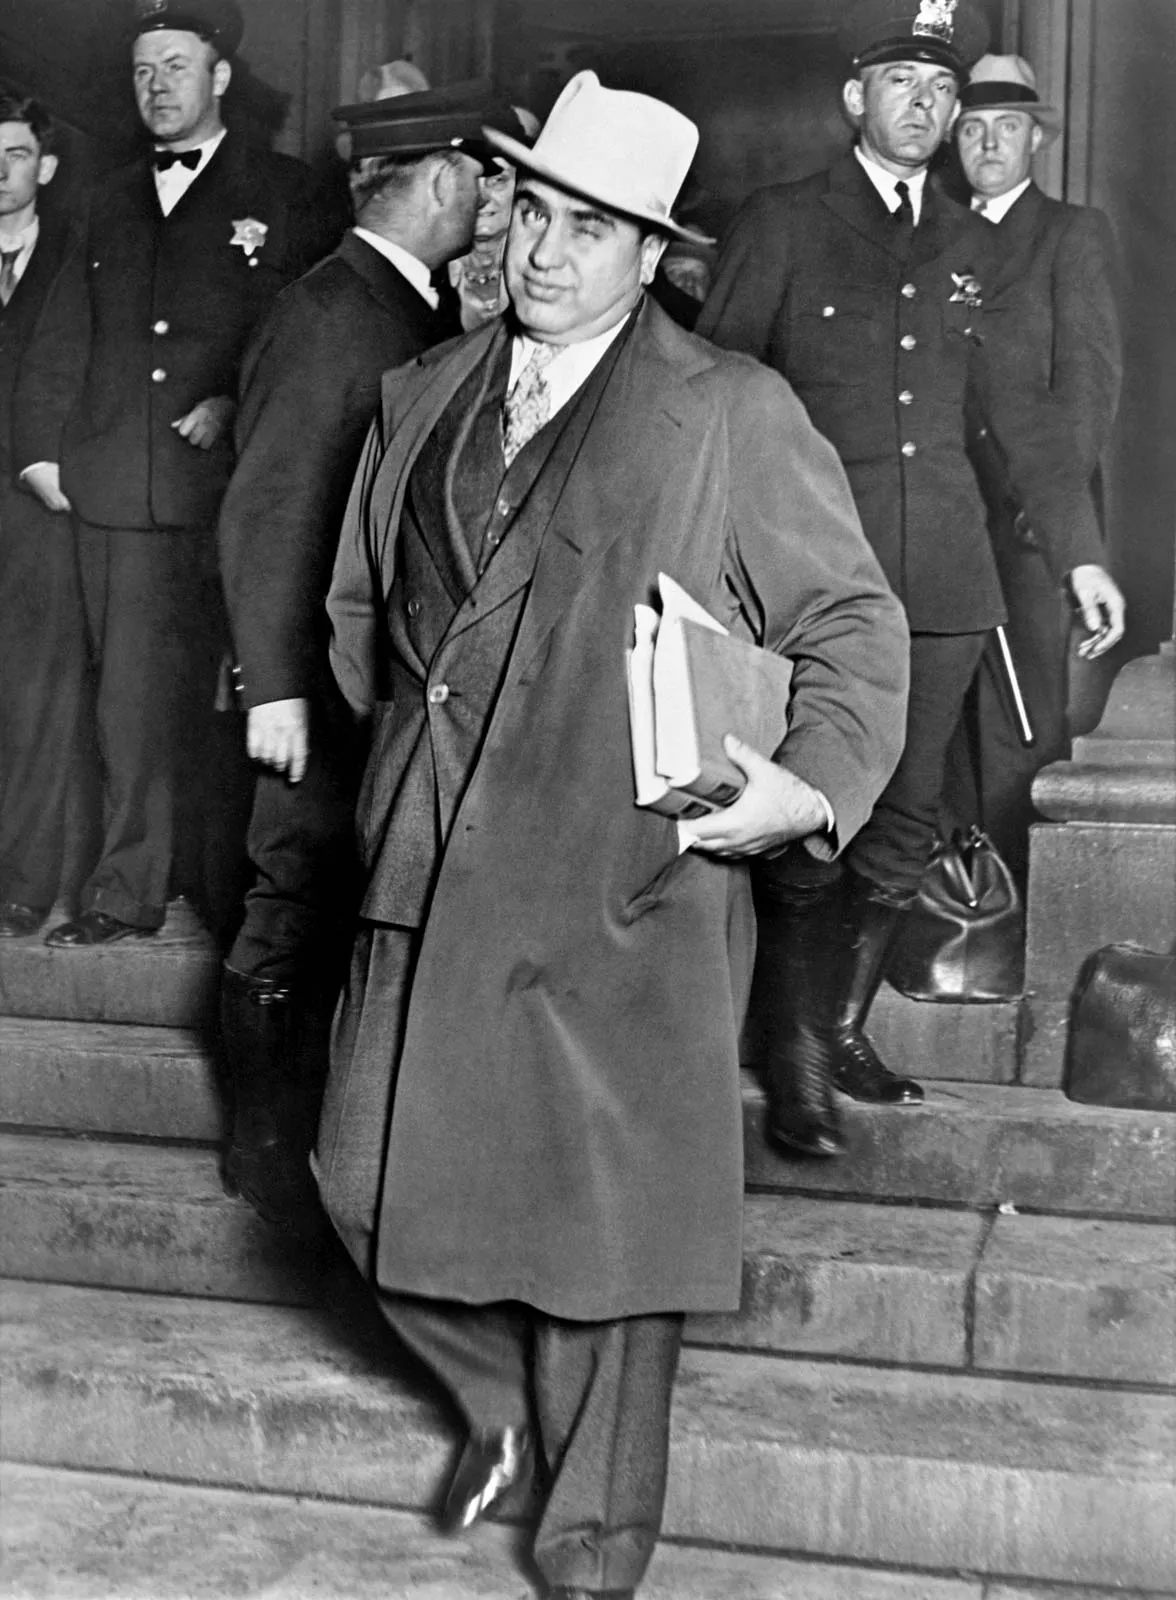 Al Capone - The Rise and Fall of the Most Famous Criminals in History